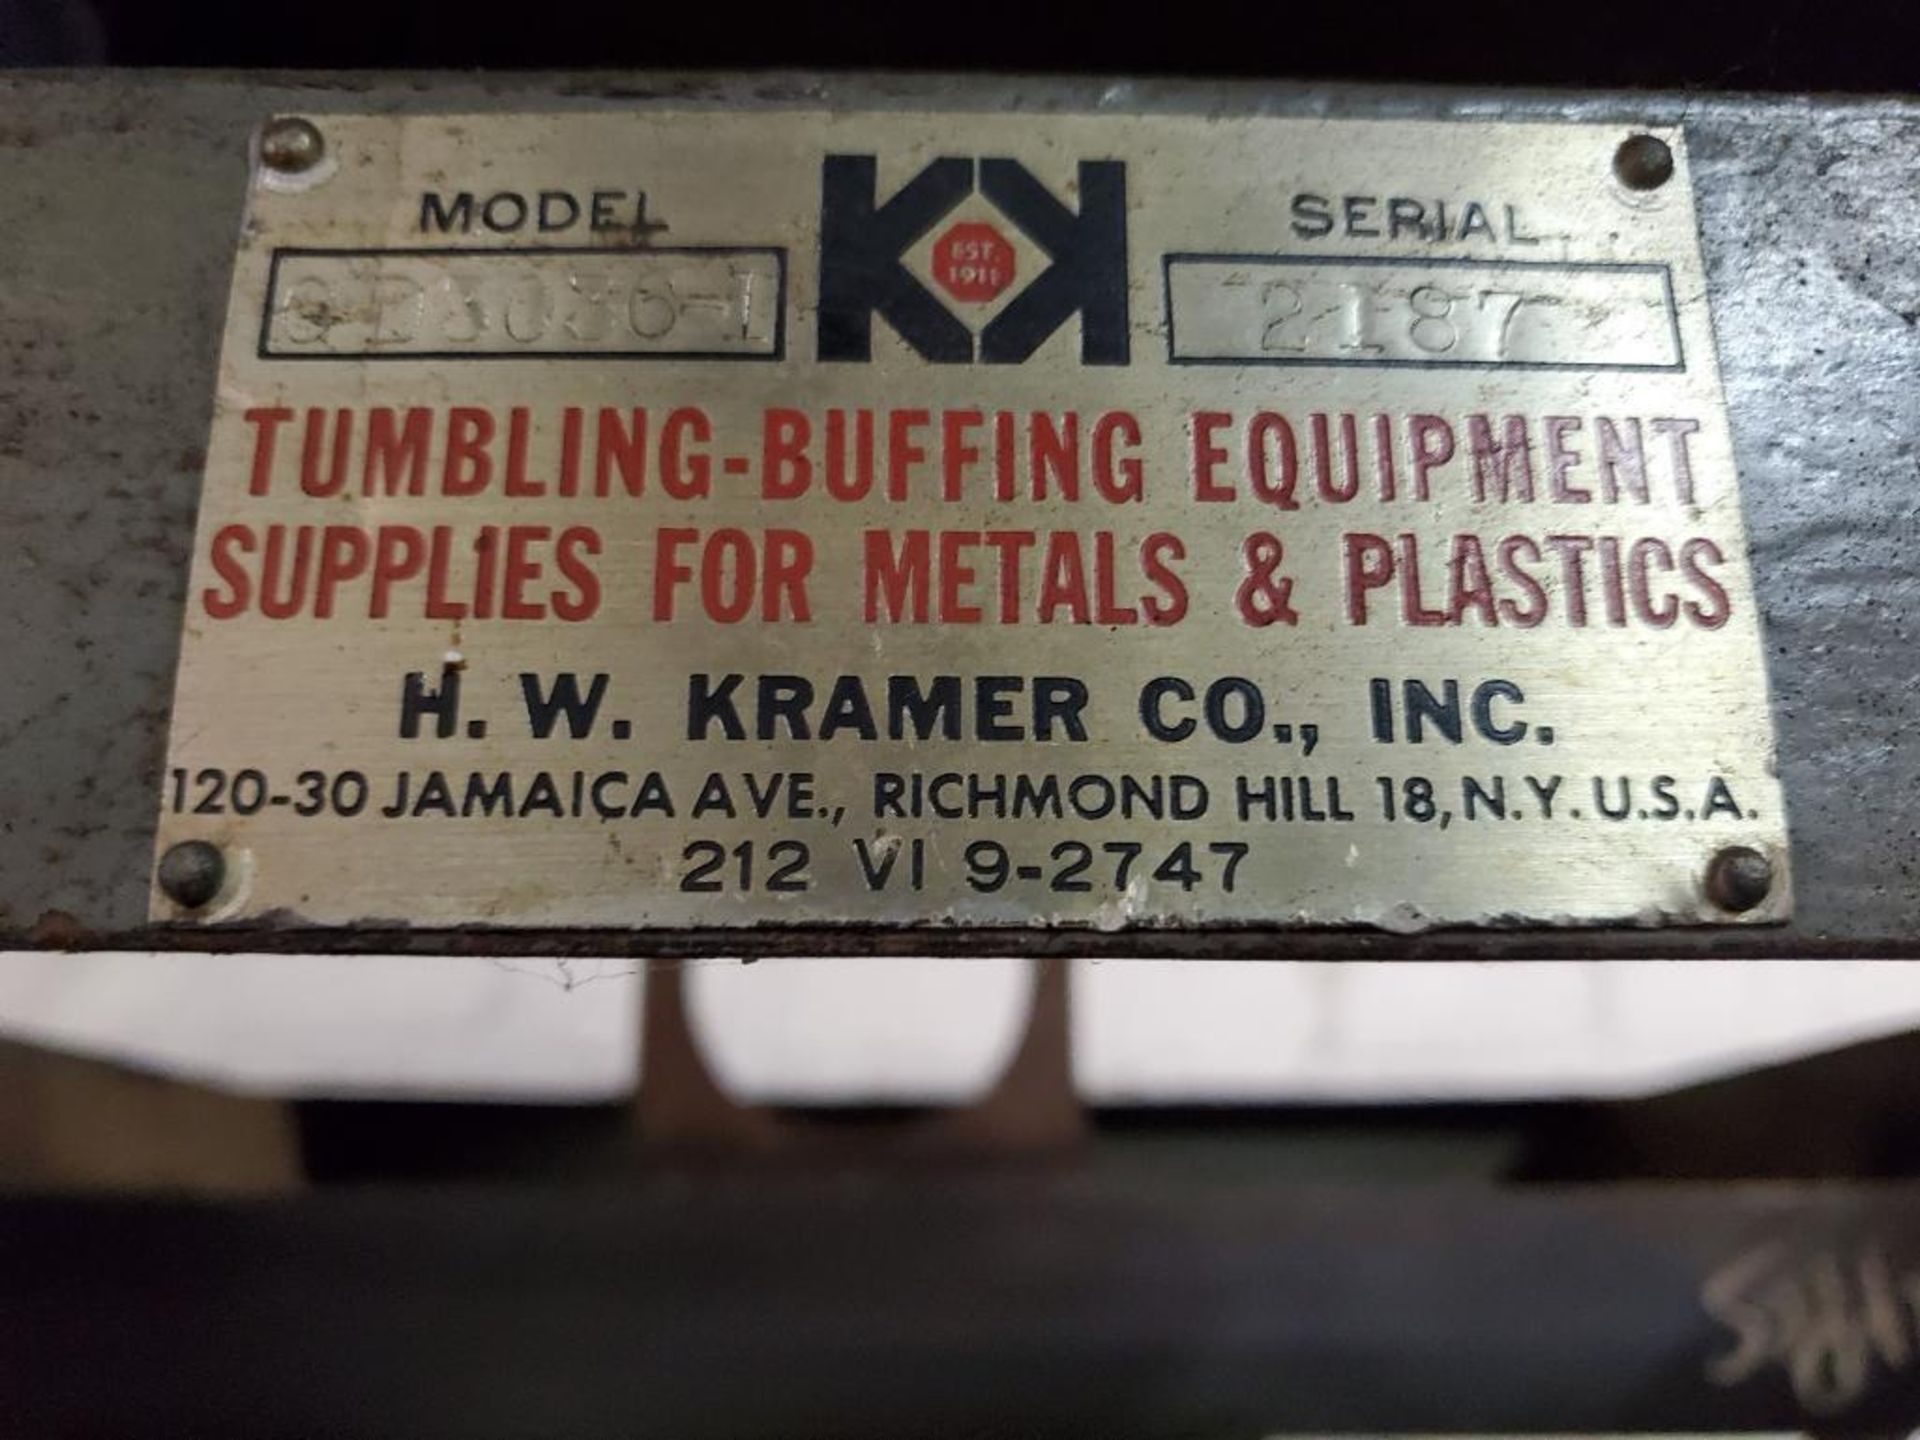 H.W. KRAMER DUAL TUMBLER, MODEL CD3036-1, S/N 2187, CHAIN DRIVEN, INTERMATIC TIME CONTROLS, 36" WIDE - Image 5 of 5